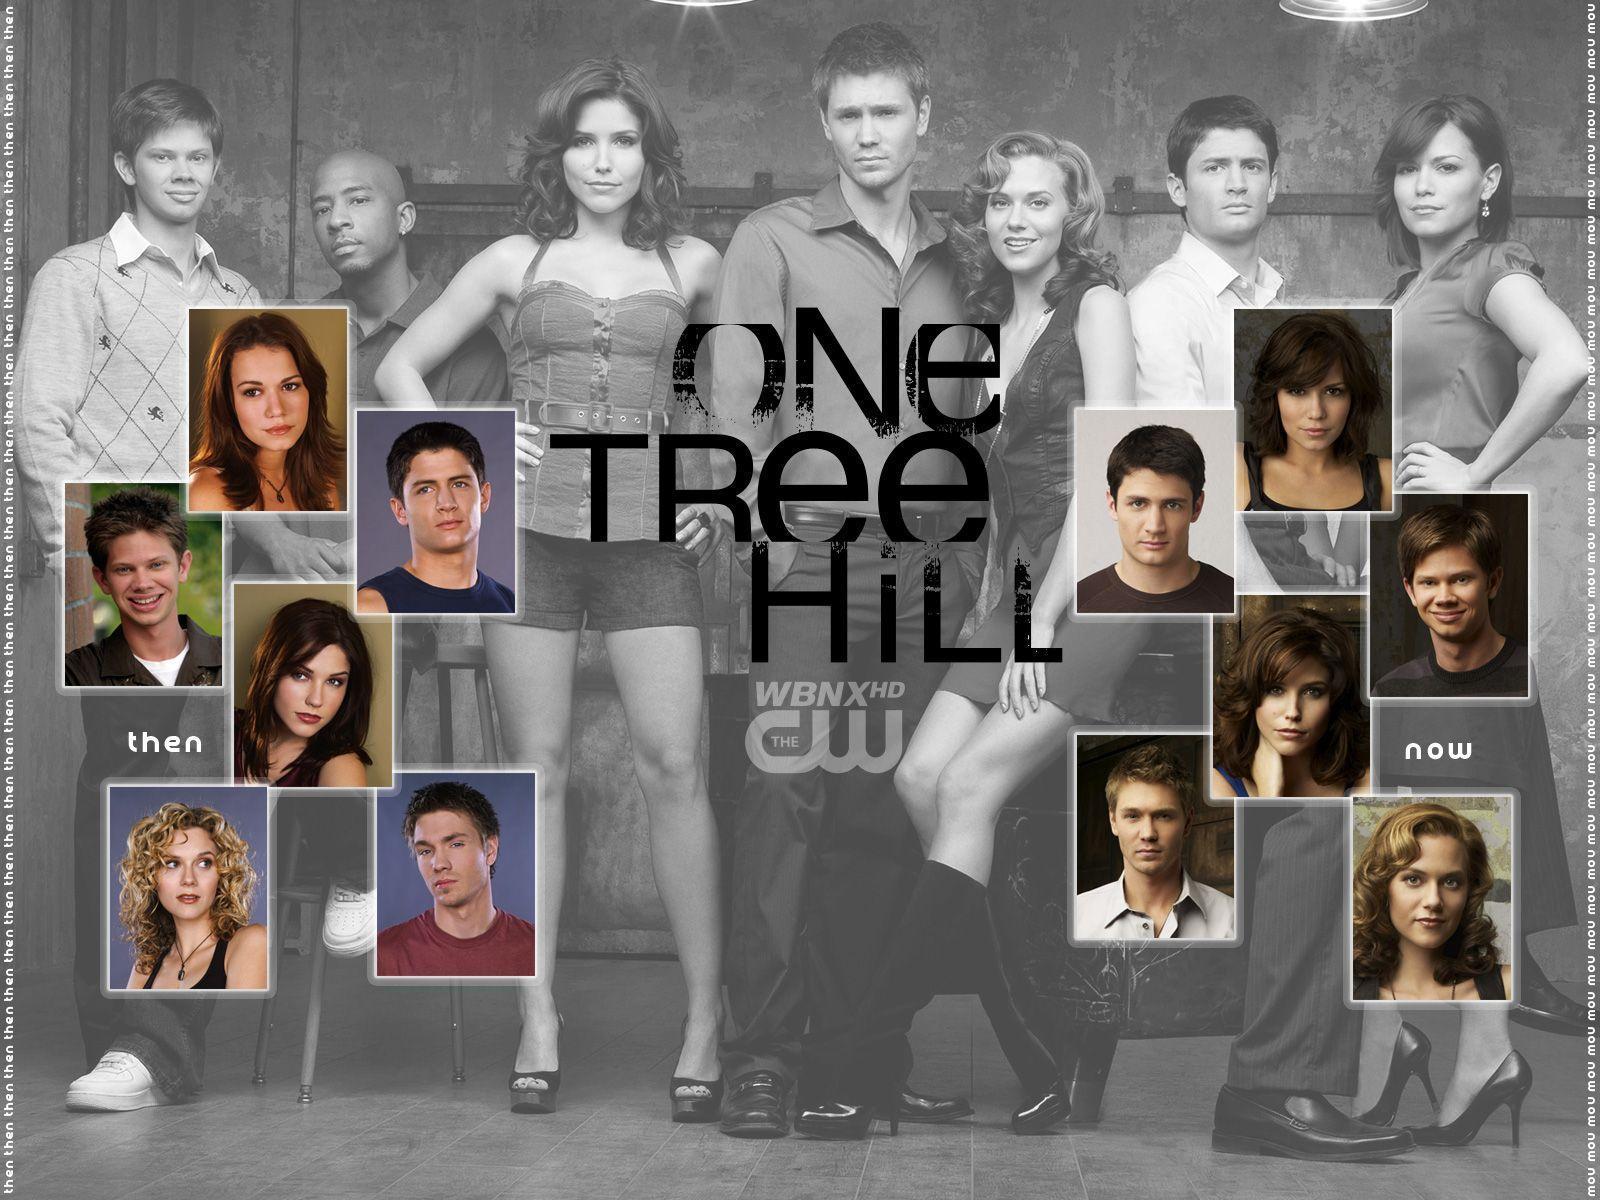 One Tree Hill Wallpaper Awesome Image n3lfc6g